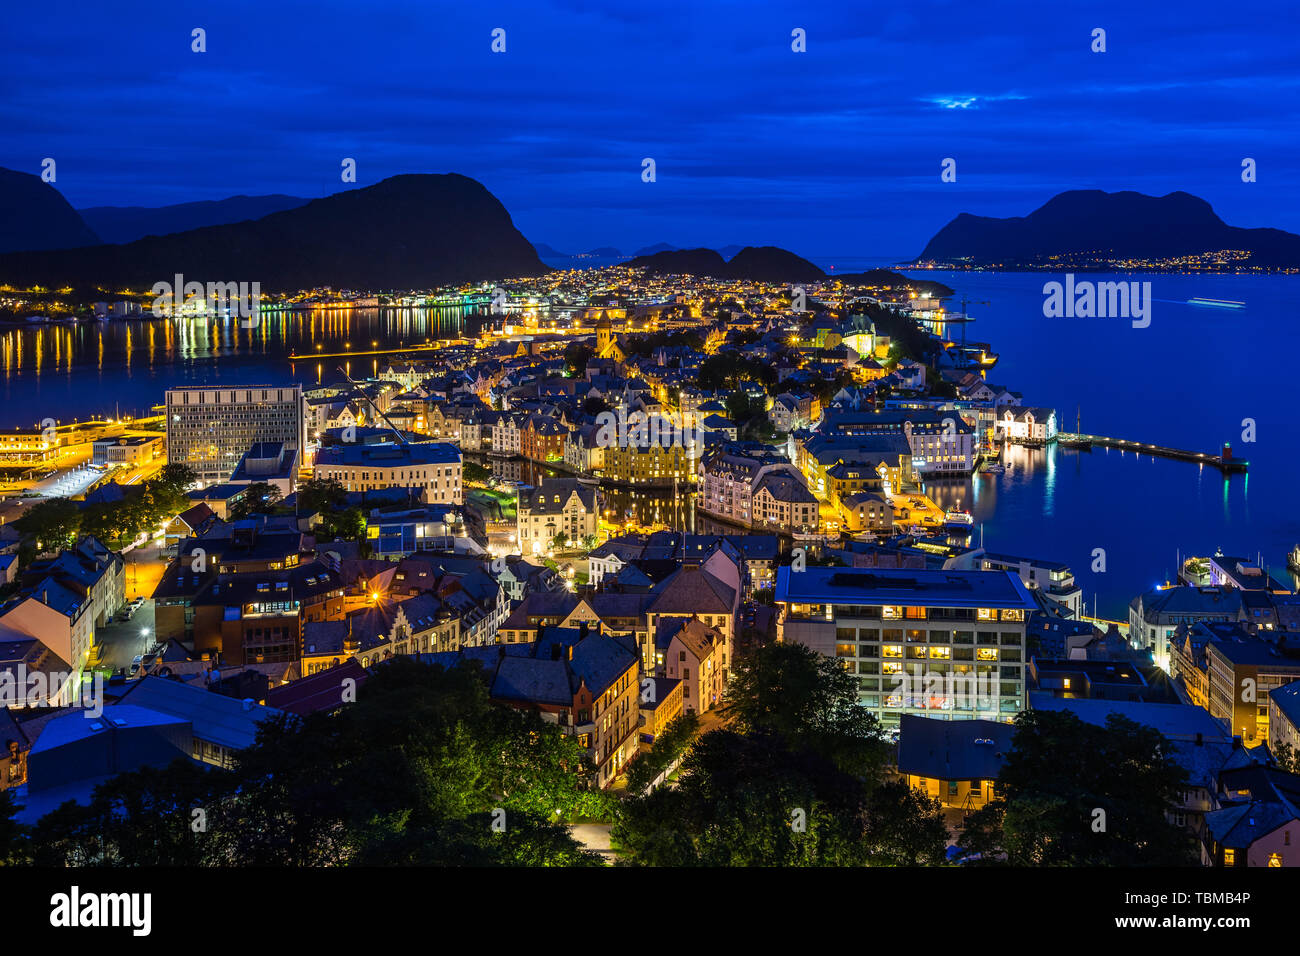 Blue hour view of Alesund, a town in Norway fjord regions famous for Art Nouveau architecture Stock Photo